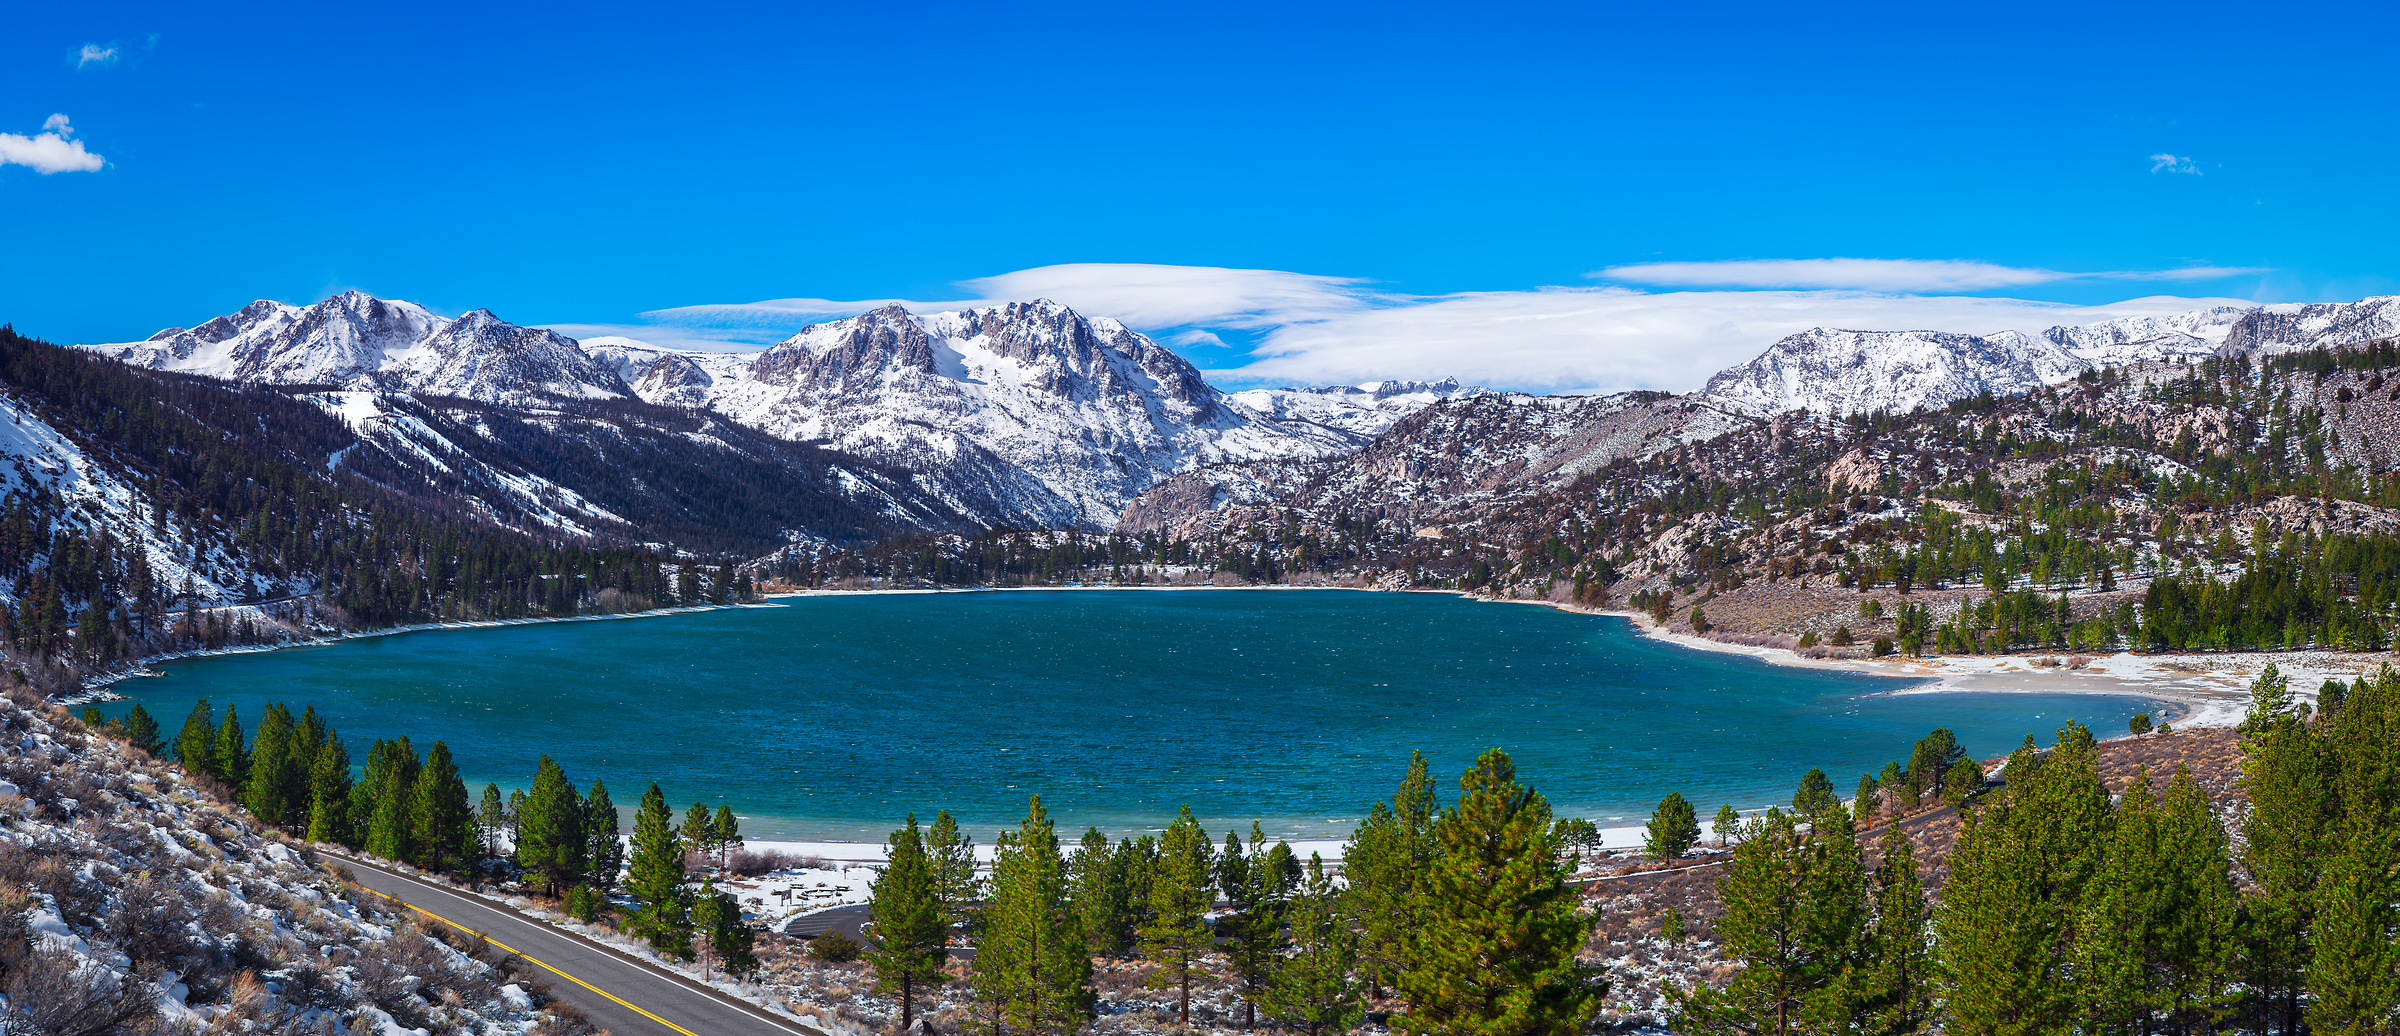 204 megapixels! A very high resolution, large-format VAST photo of a lake and mountains; inspirational landscape photograph created by Jim Tarpo in June Lake, California.